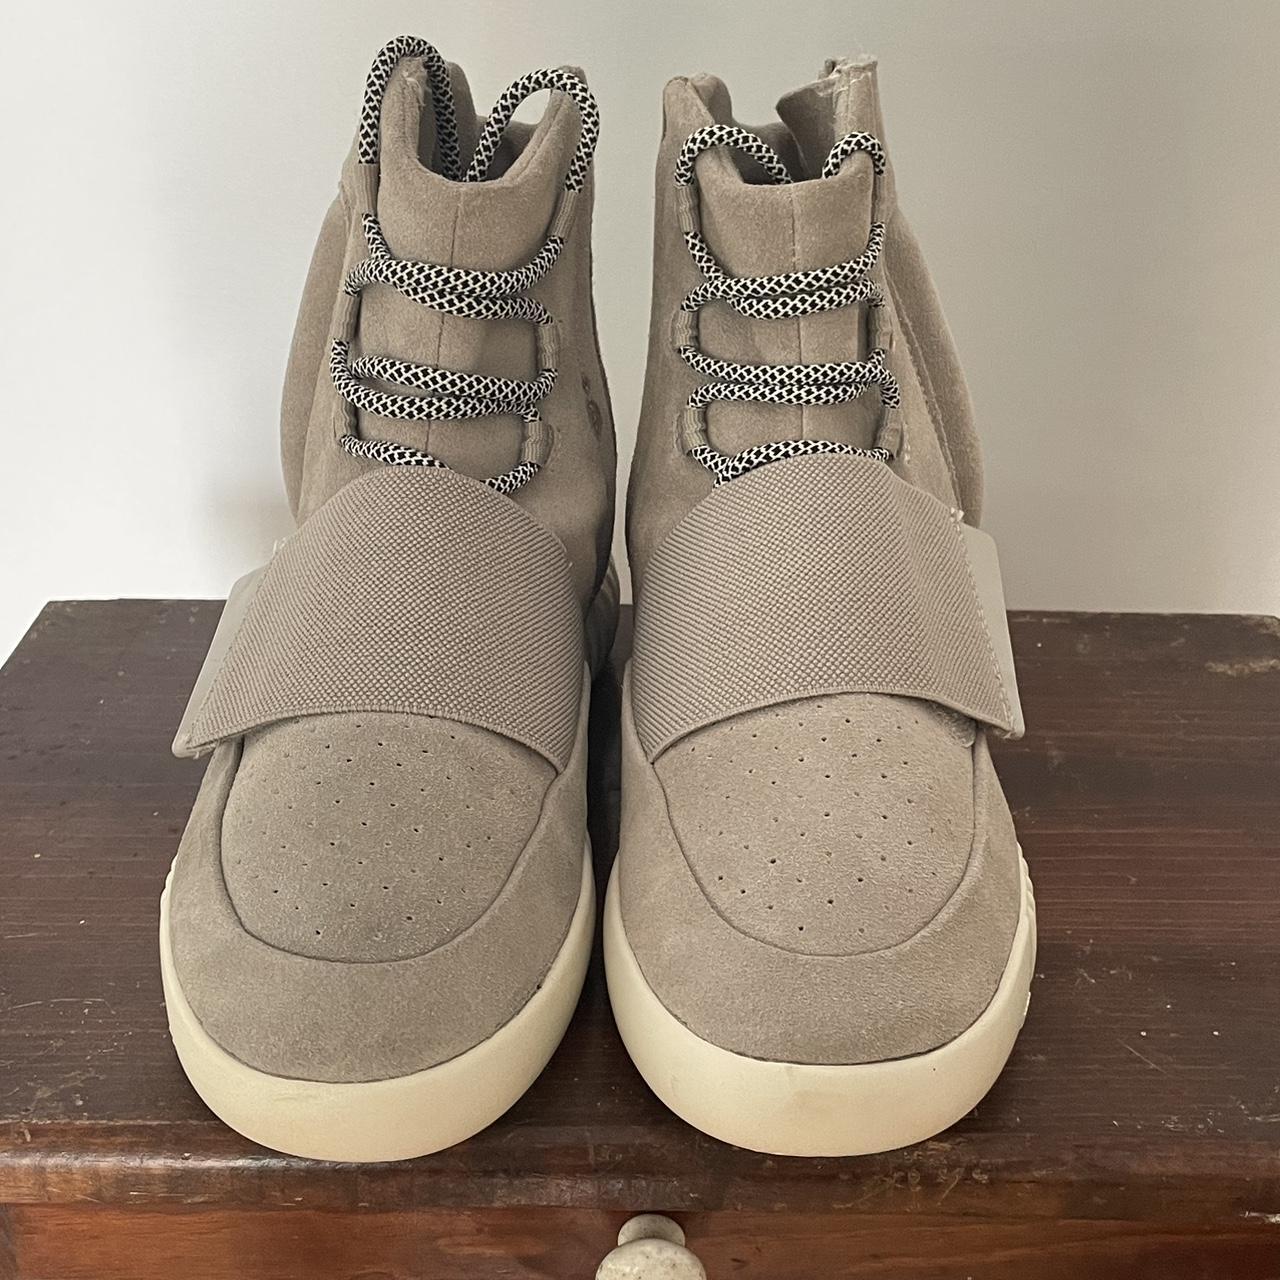 Yeezy 750 OG colorway, worn, but not used outside.... - Depop